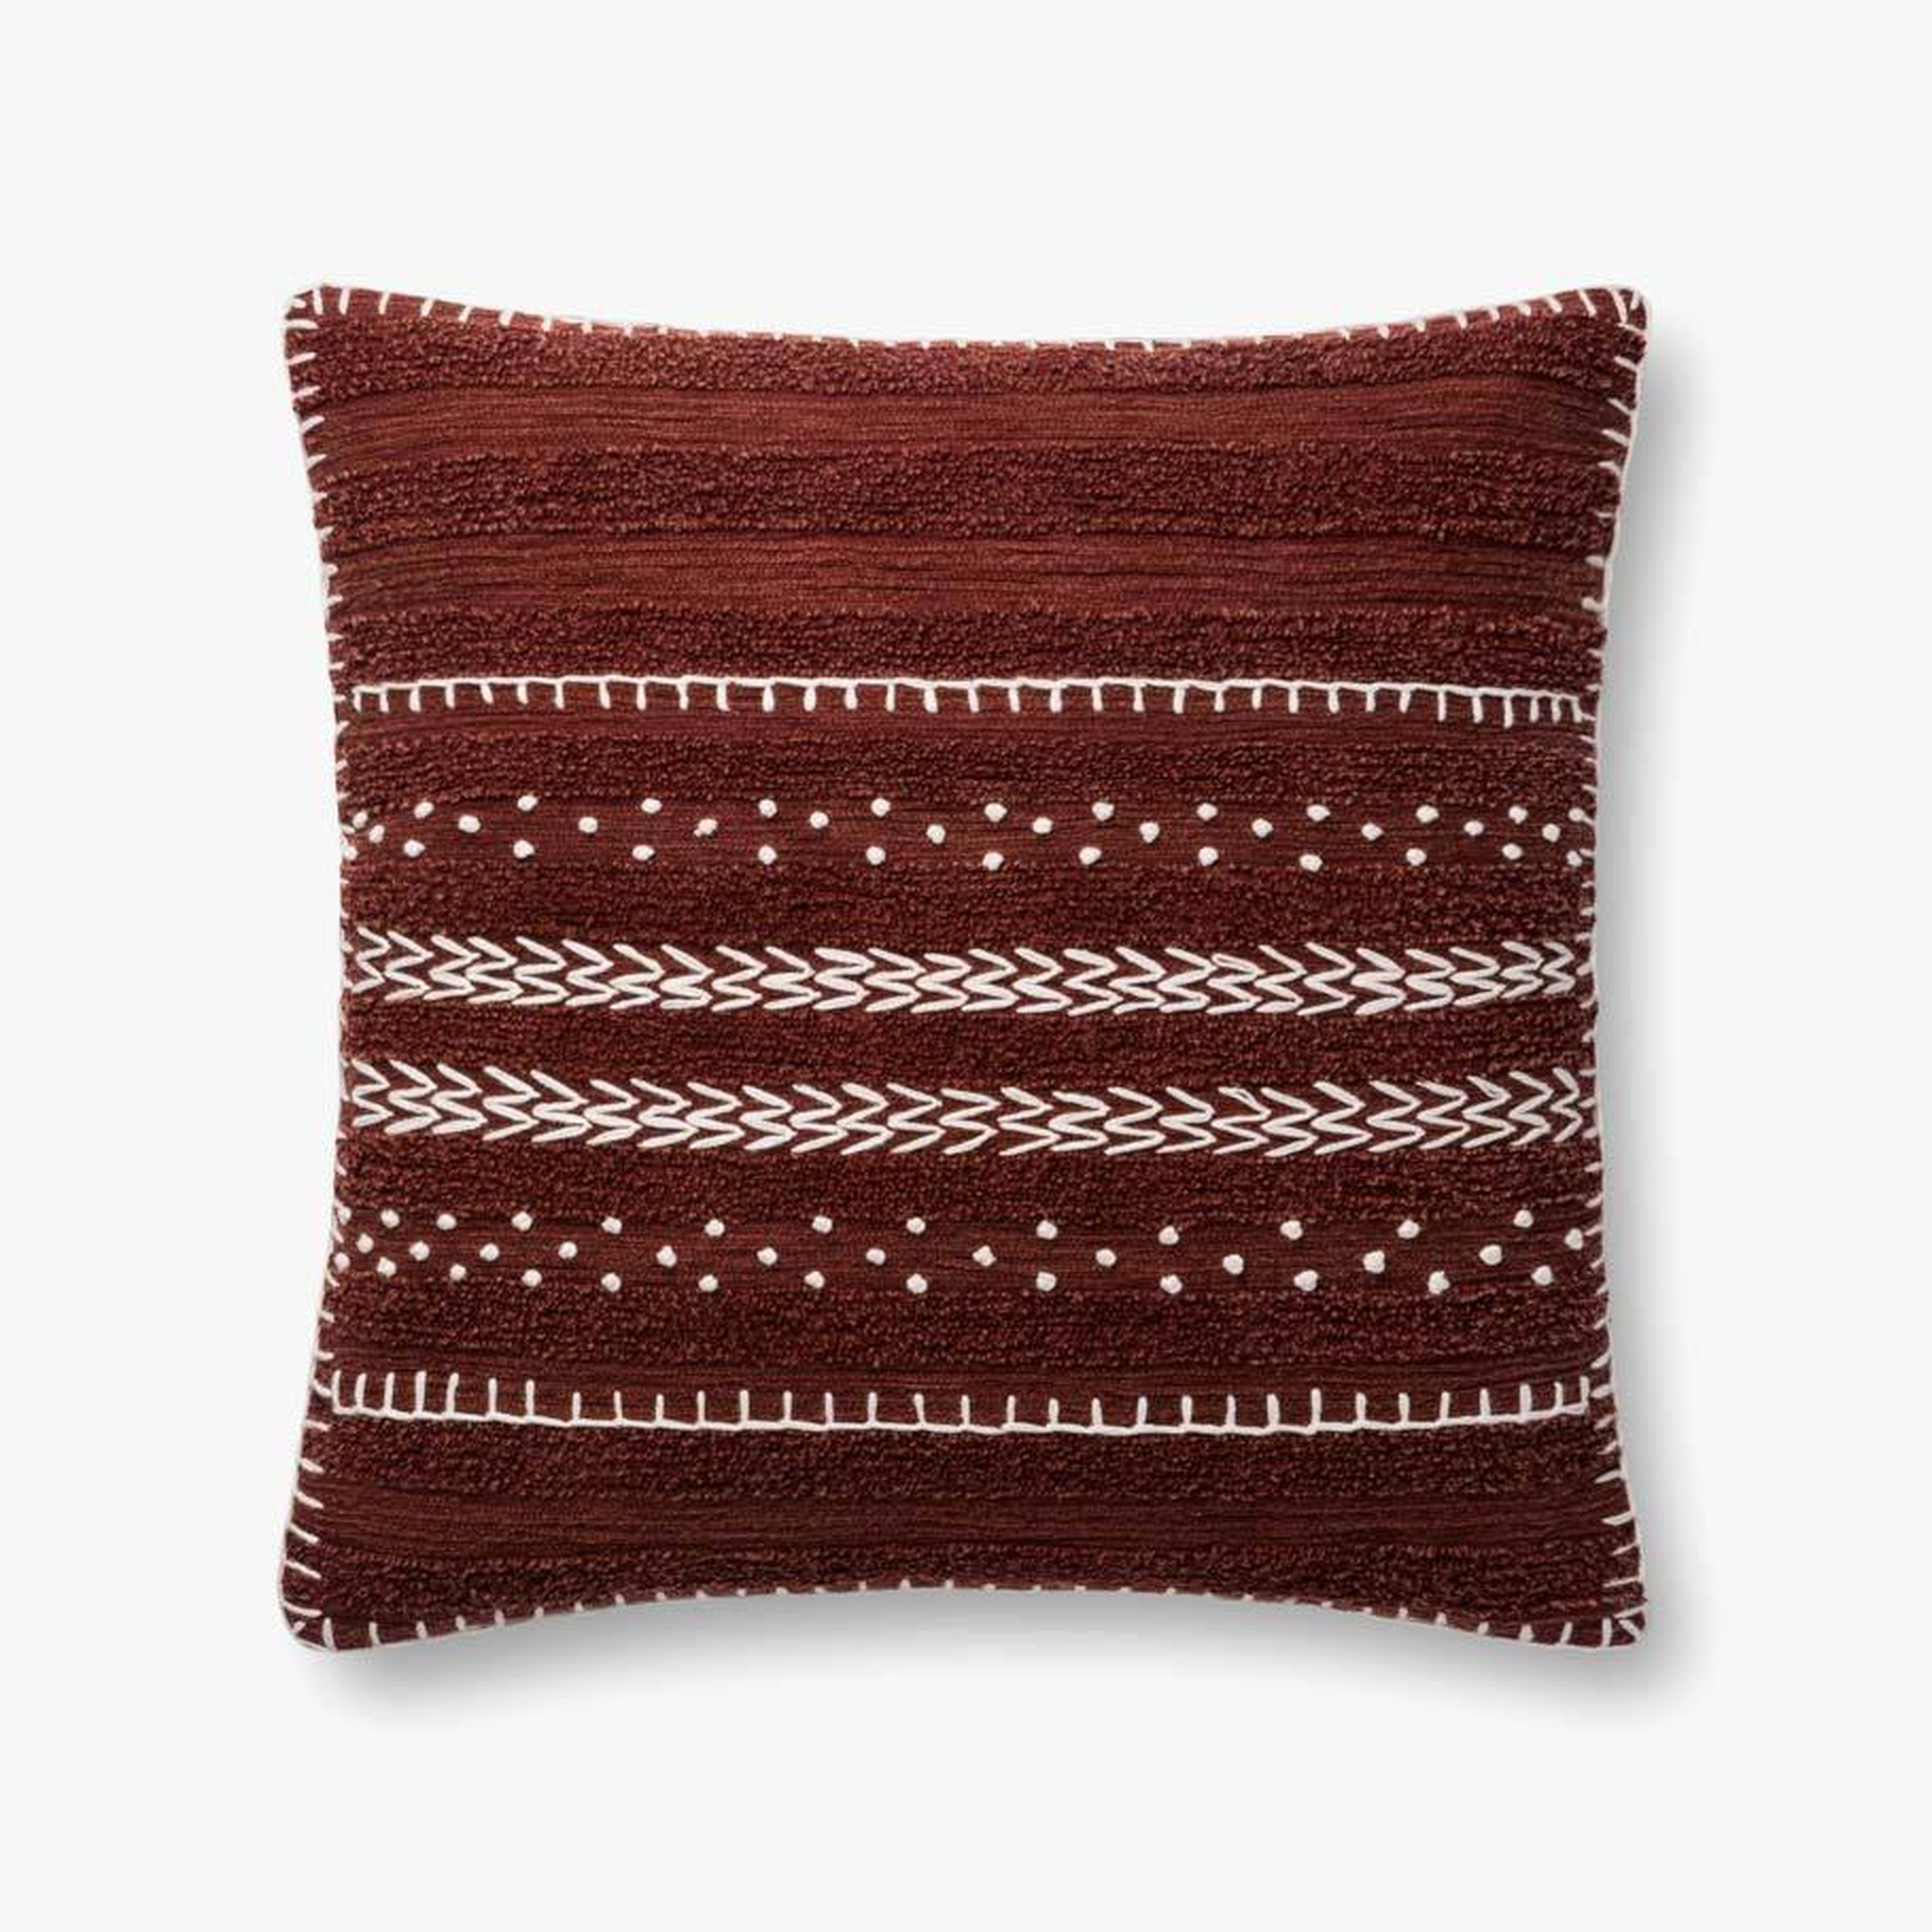 P4095 ED BURGUNDY, 22" Pillow with Down Insert - Loloi Rugs